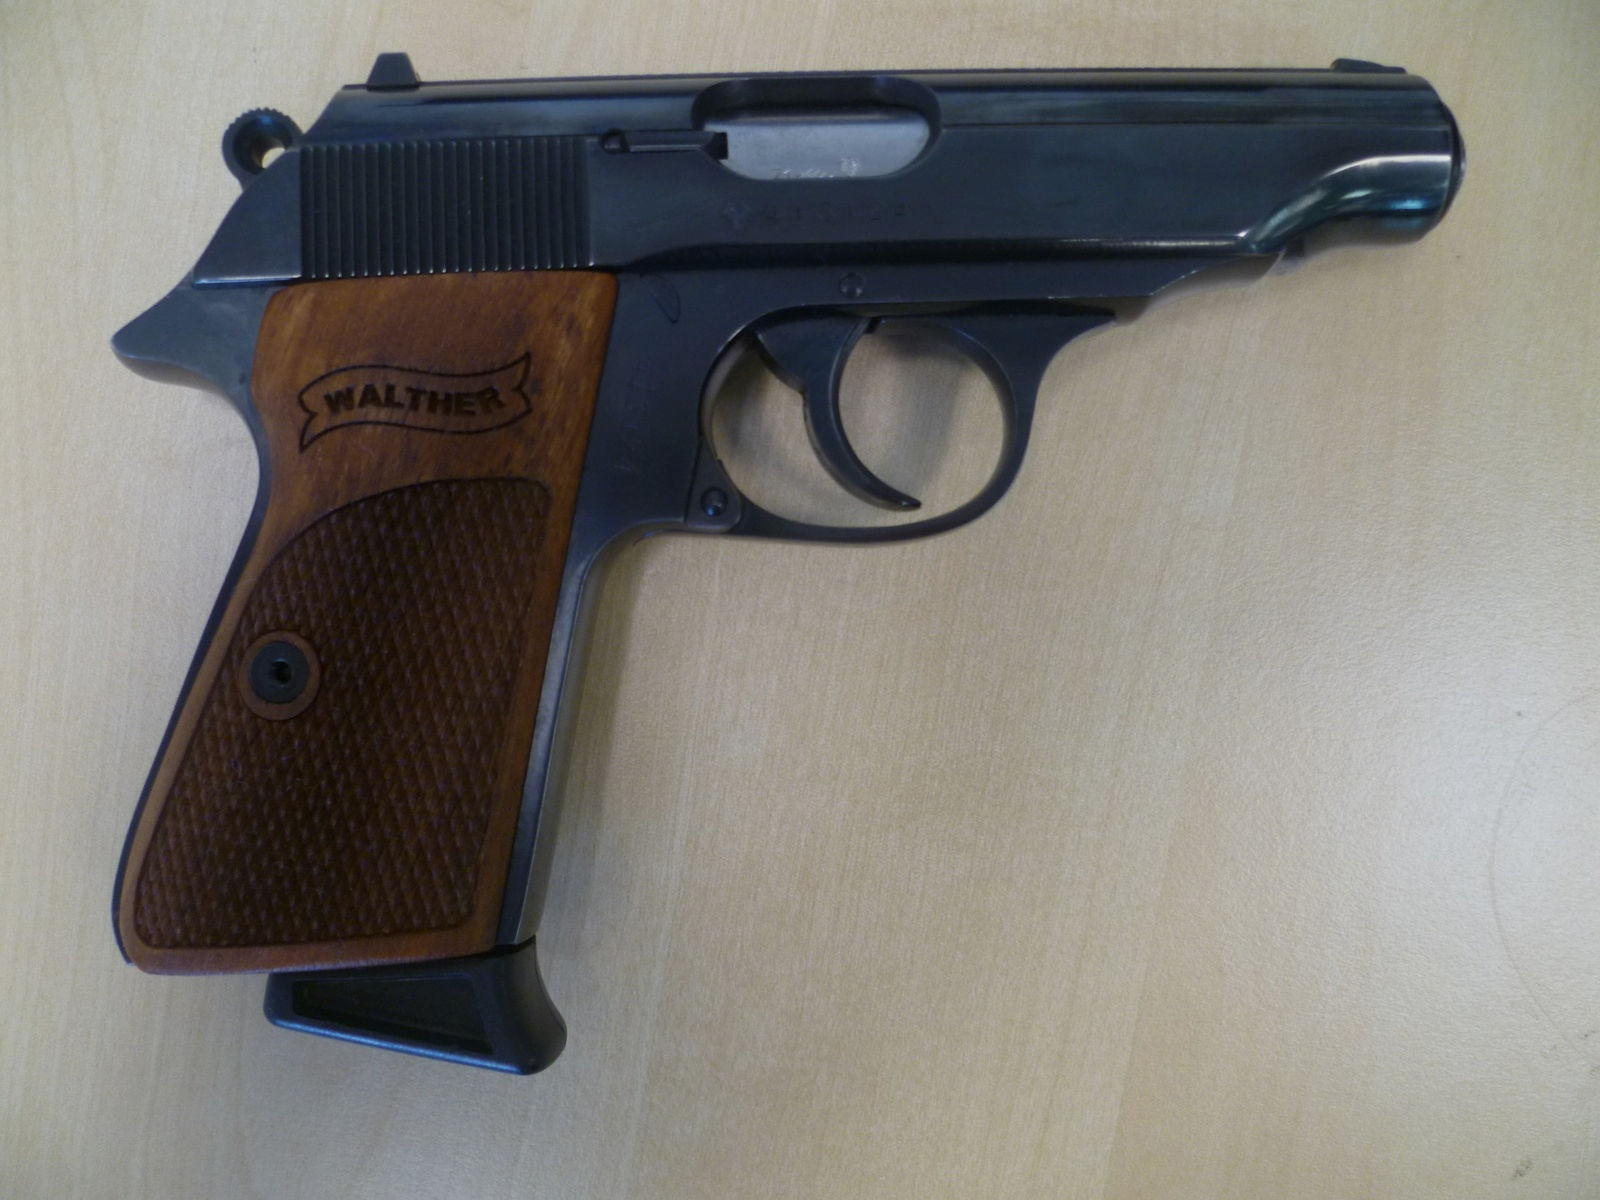 Pistole Walther PP - 7,65 mm Browning